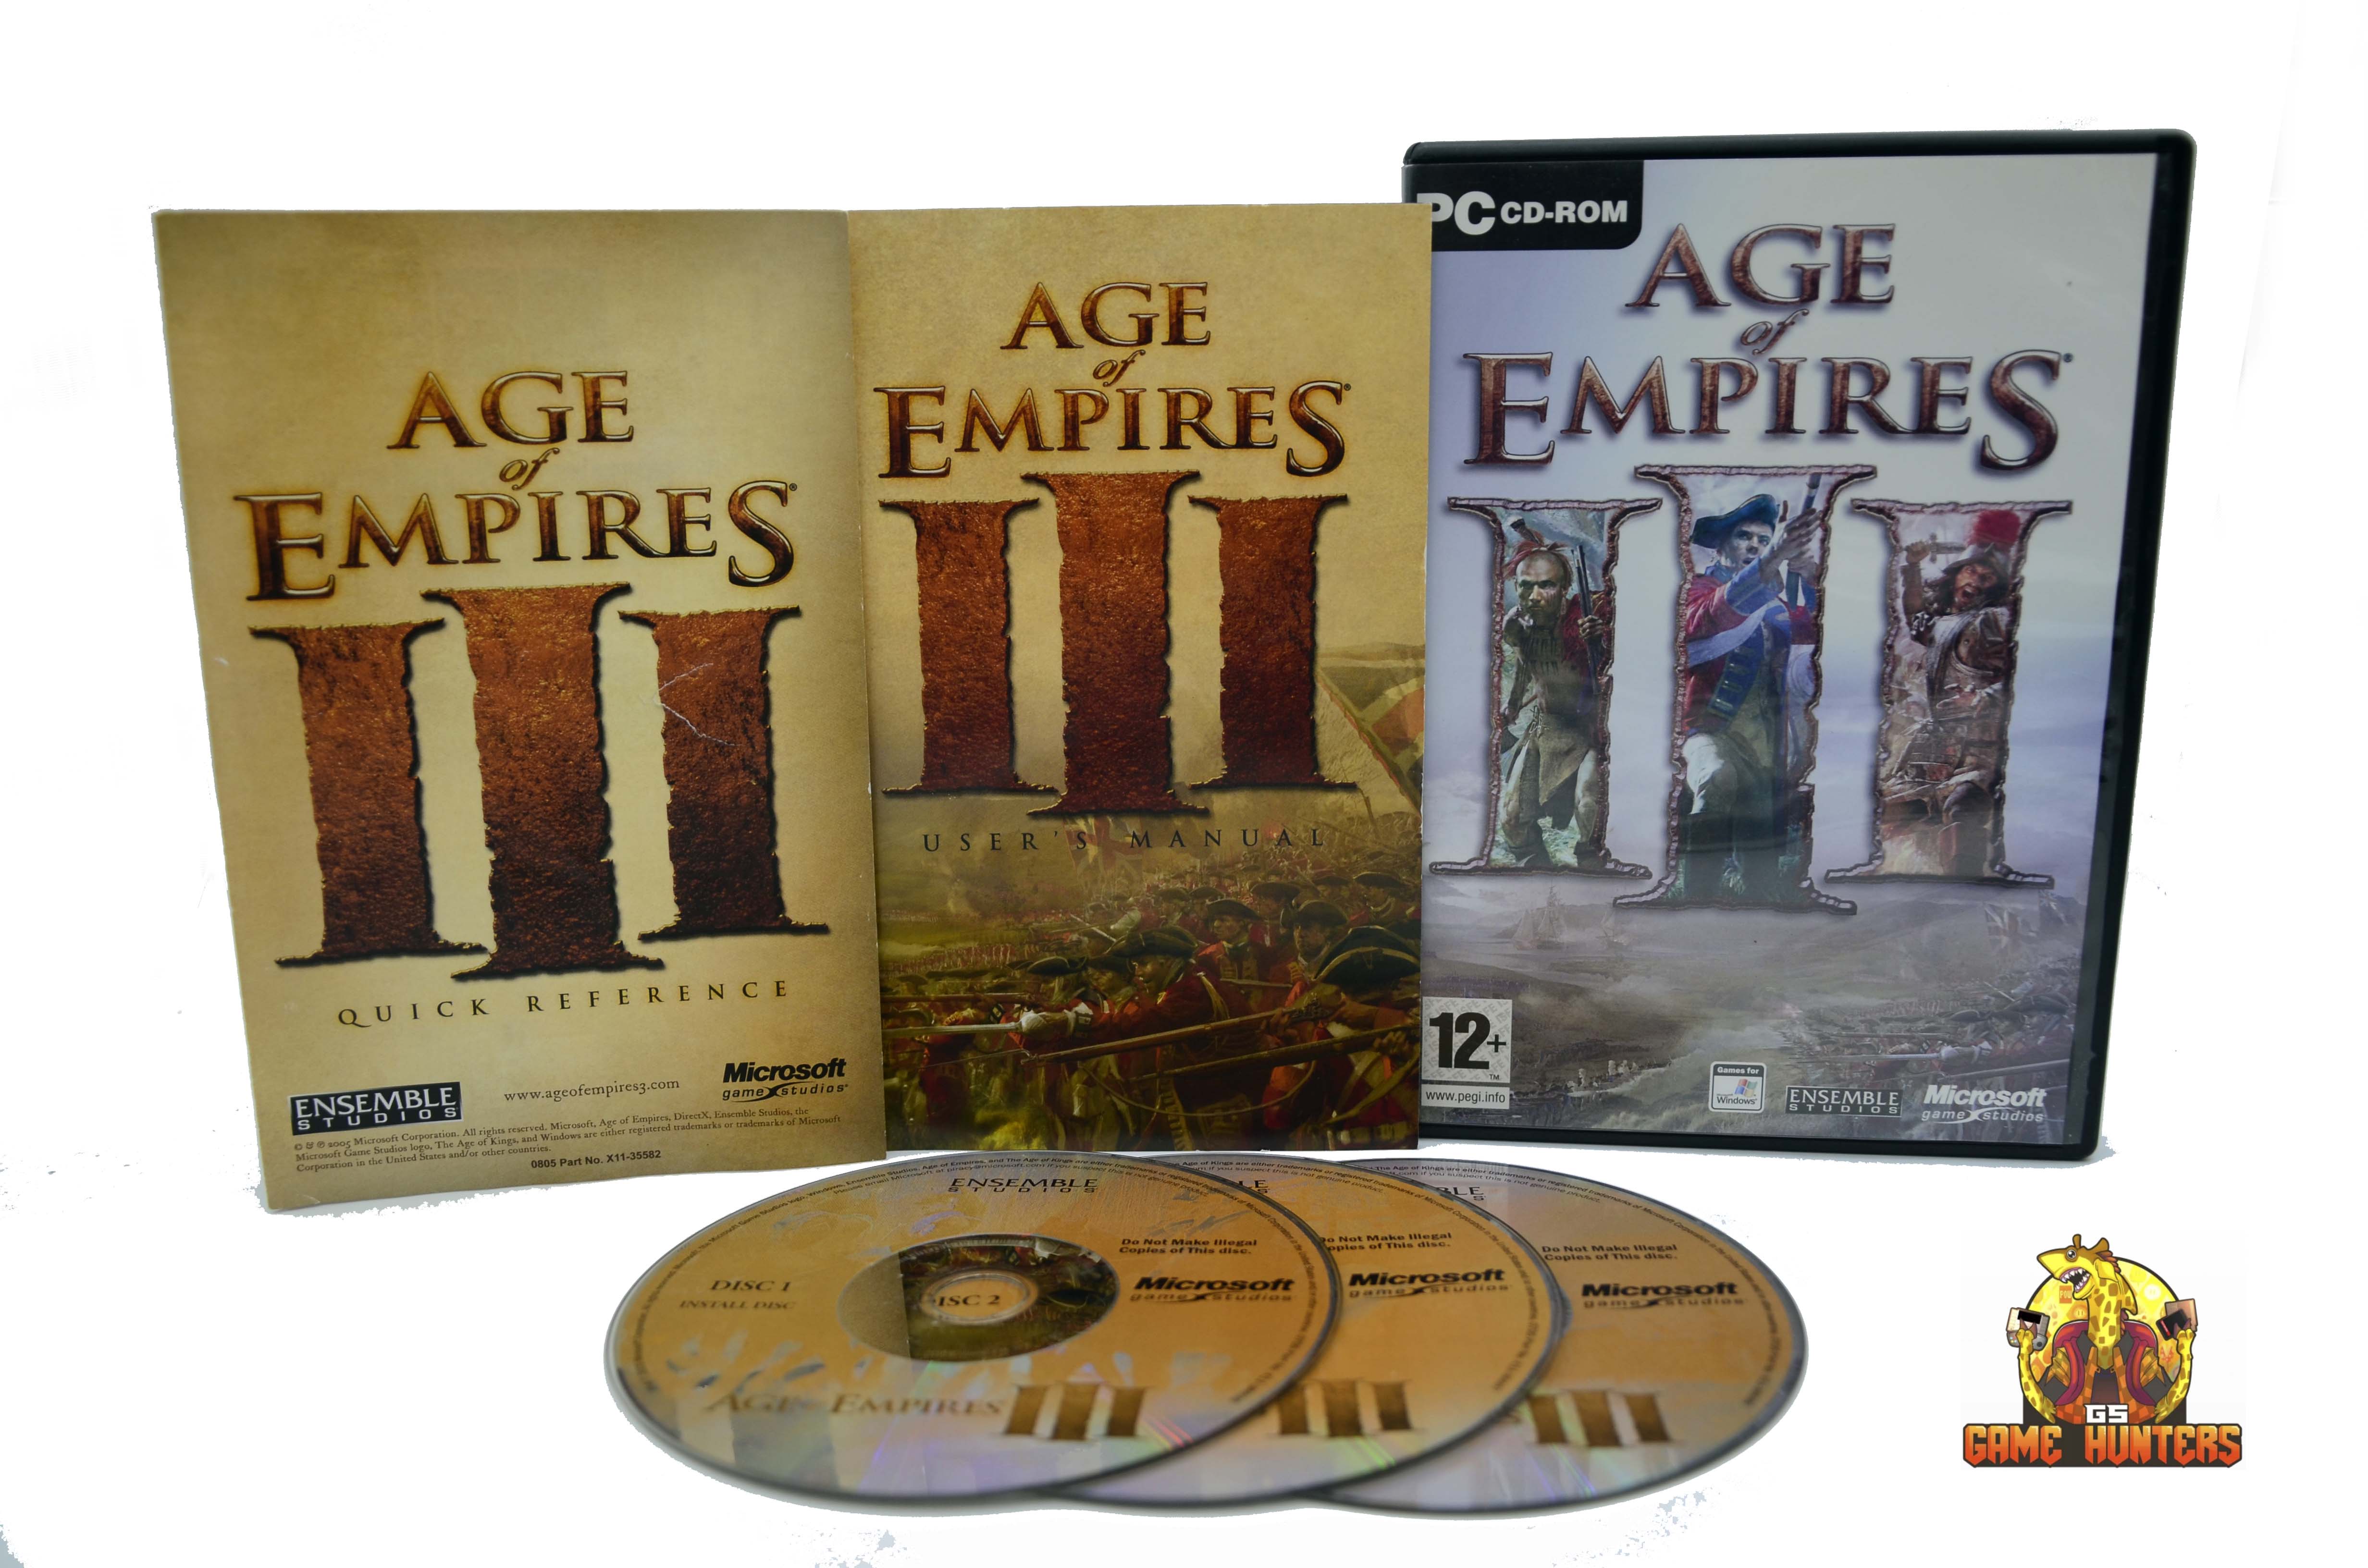 Age of Empires III Case, Manual, Quick reference guide & Discs.jpg  by GSGAMEHUNTERS